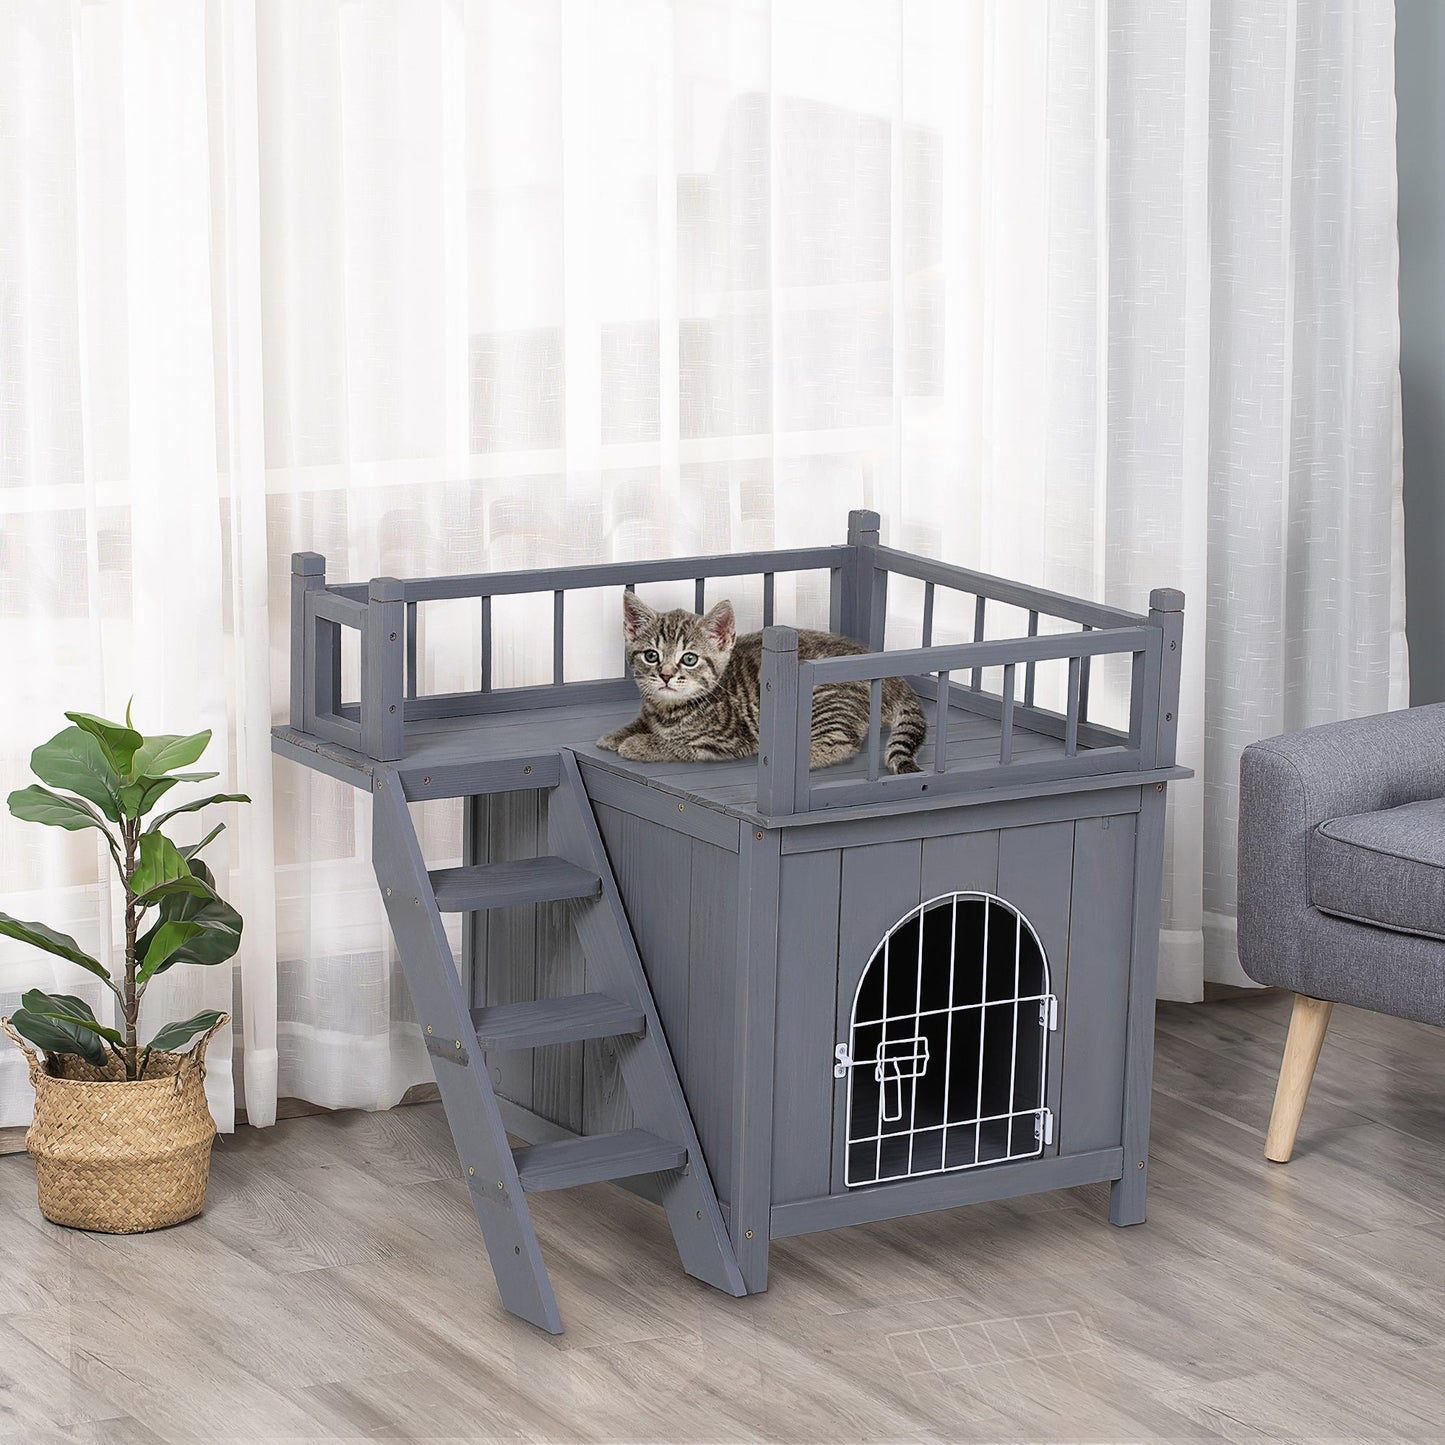 -PawHut 2-Level Wooden Outdoor Cat House , Outdoor Dog Shelter Cat Condo with Lockable Wire Door and Balcony, Grey - Outdoor Style Company